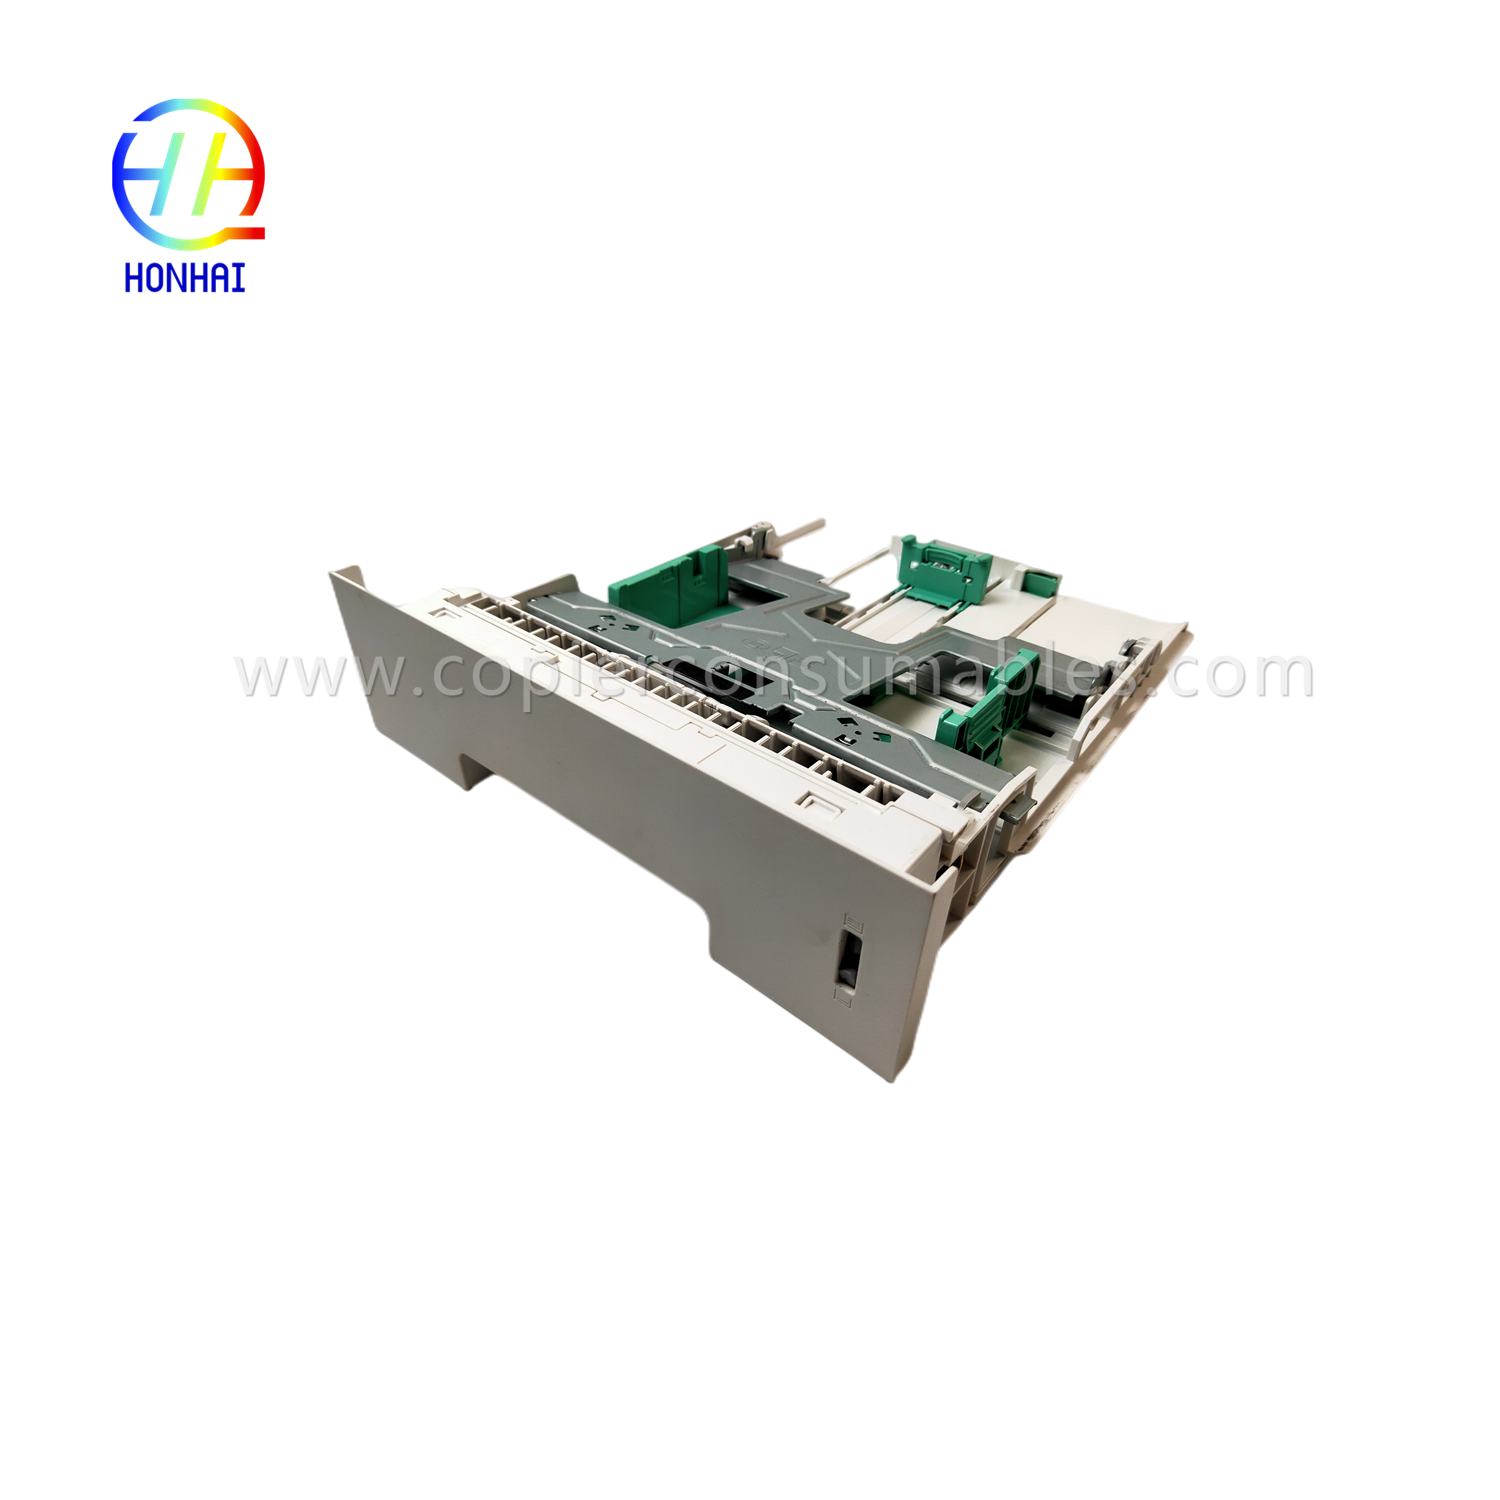 https://www.copierconsumables.com/paper-tray-assemble-for-xerox-phaser-3320dni-workcentre-3315dn-3325dni-050n00650